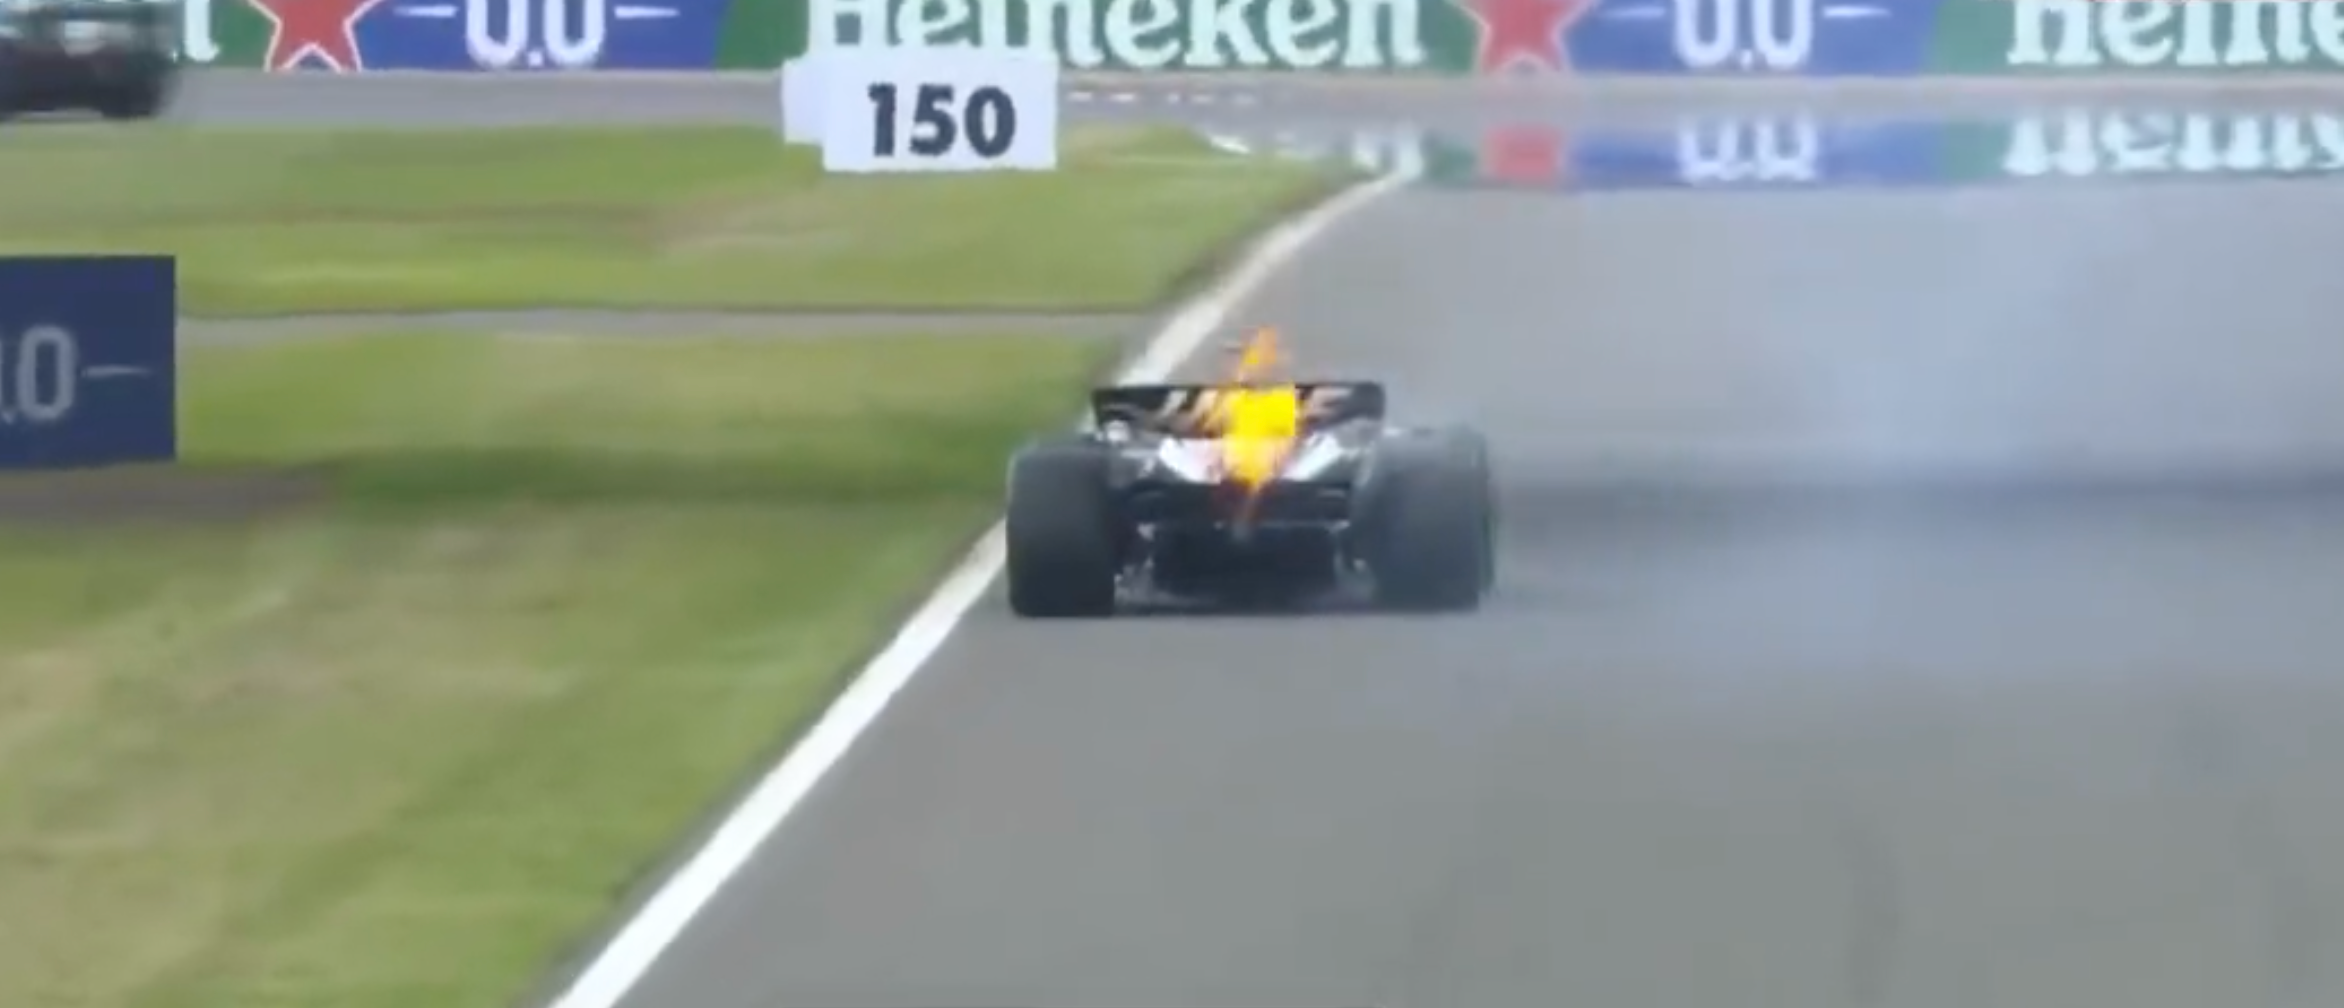 Kevin Magnussen’s car caught fire at the British Grand Prix